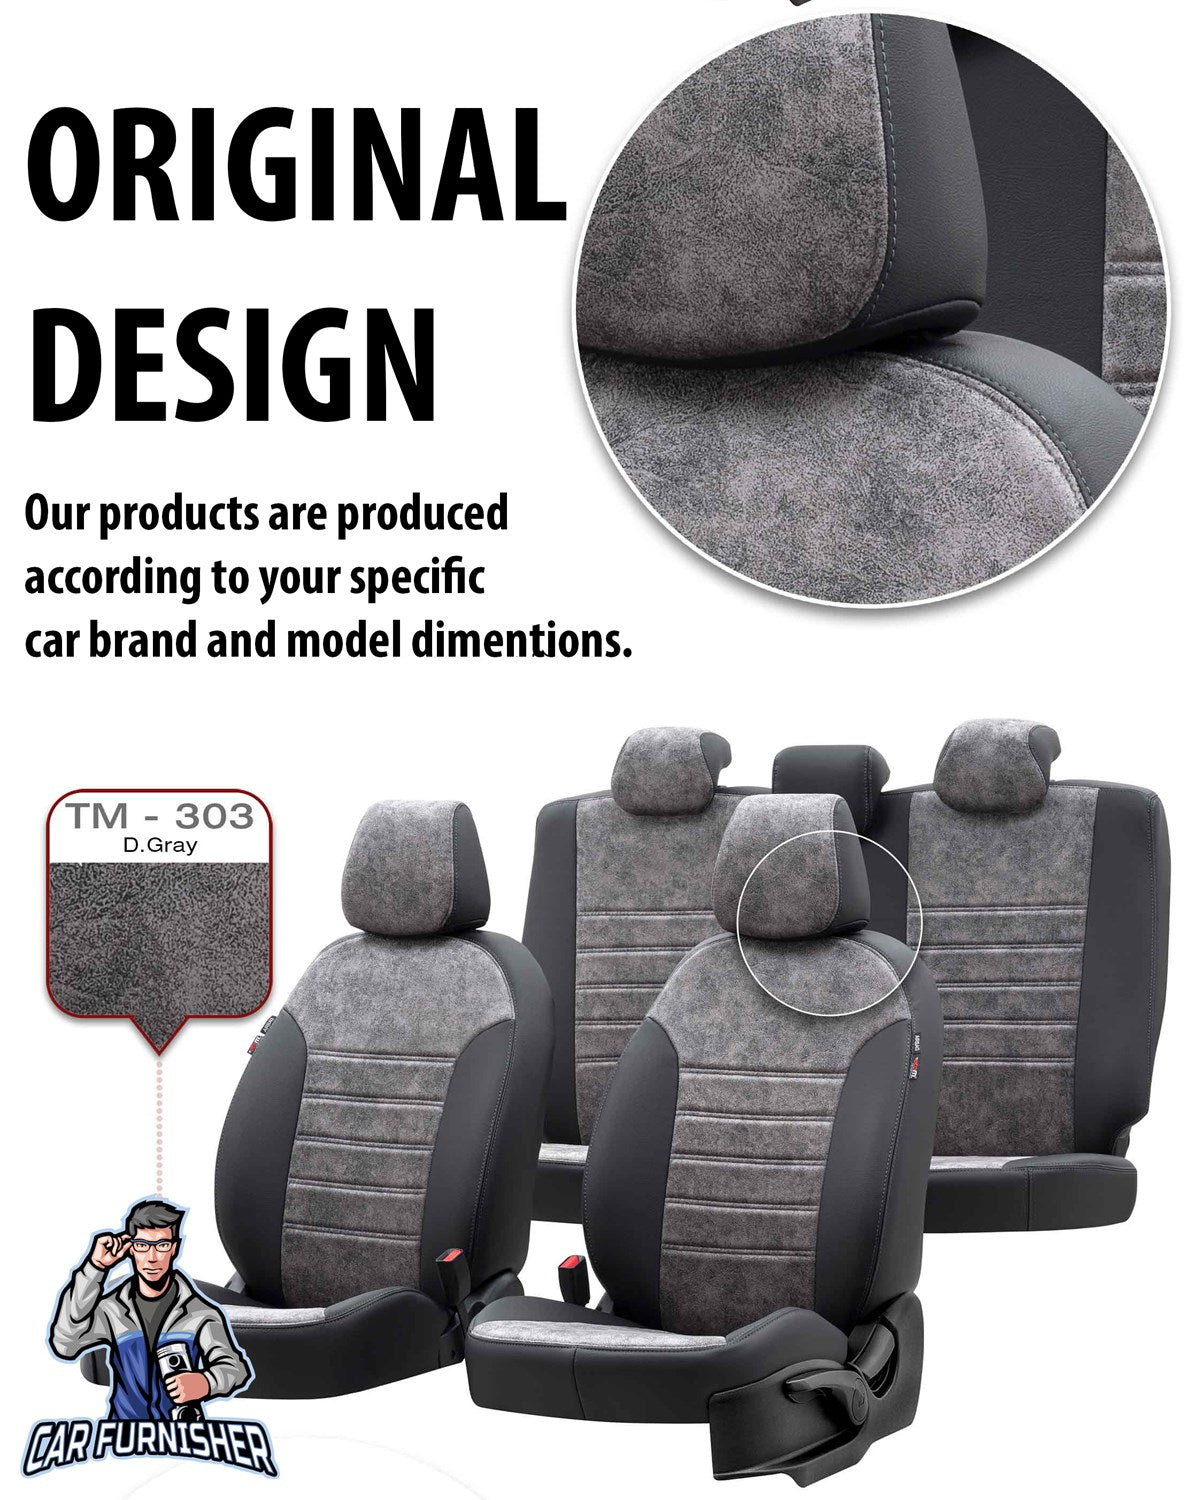 Opel Frontera Seat Cover Milano Suede Design Black Leather & Suede Fabric